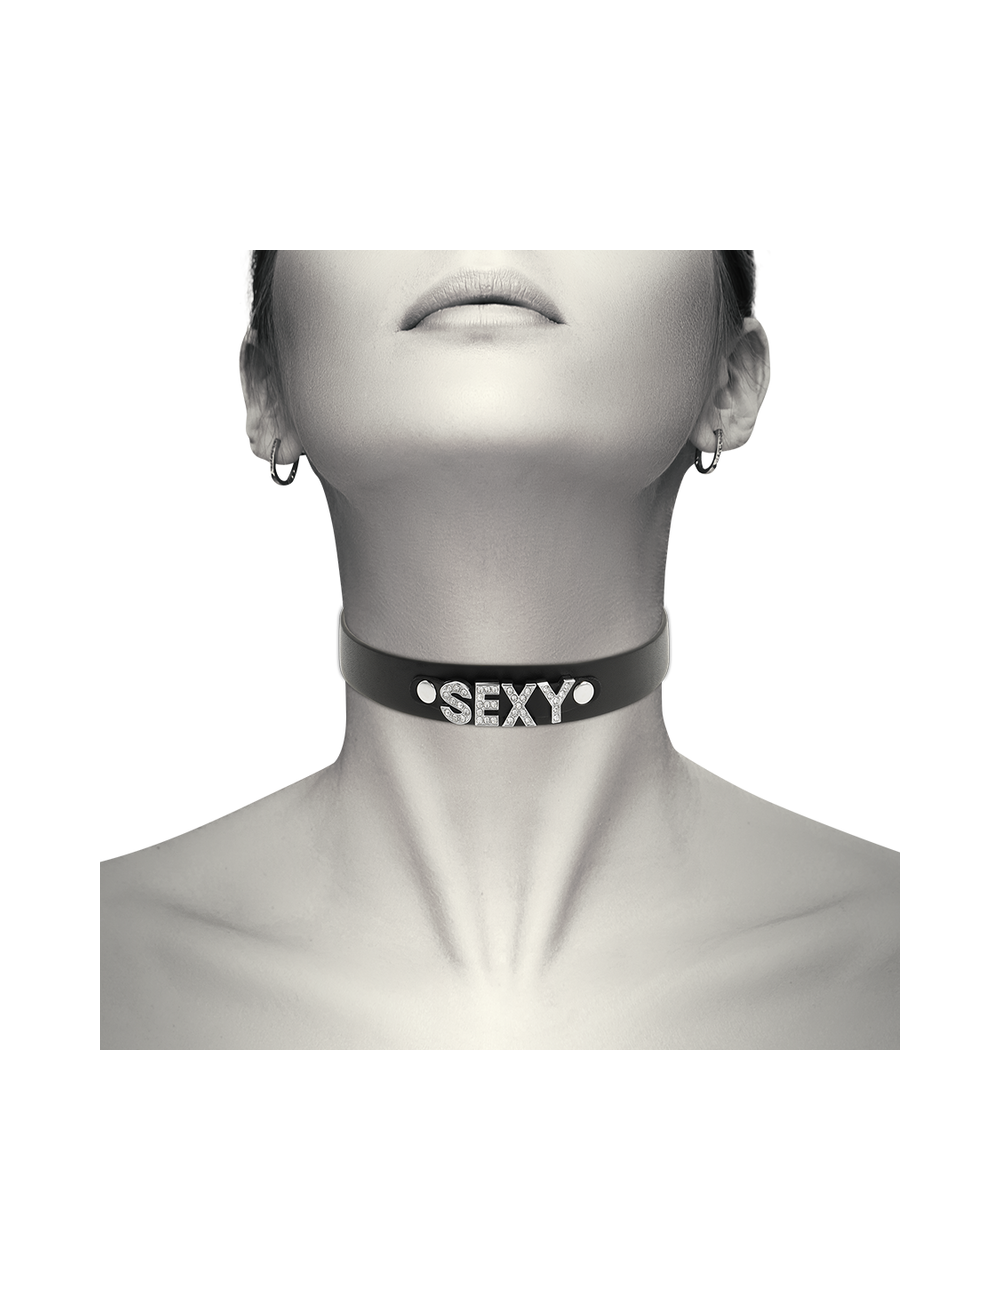 Sextoys - Bondage - SM - COQUETTE HAND CRAFTED CHOKER VEGAN LEATHER - SEXY - Coquette Accessories